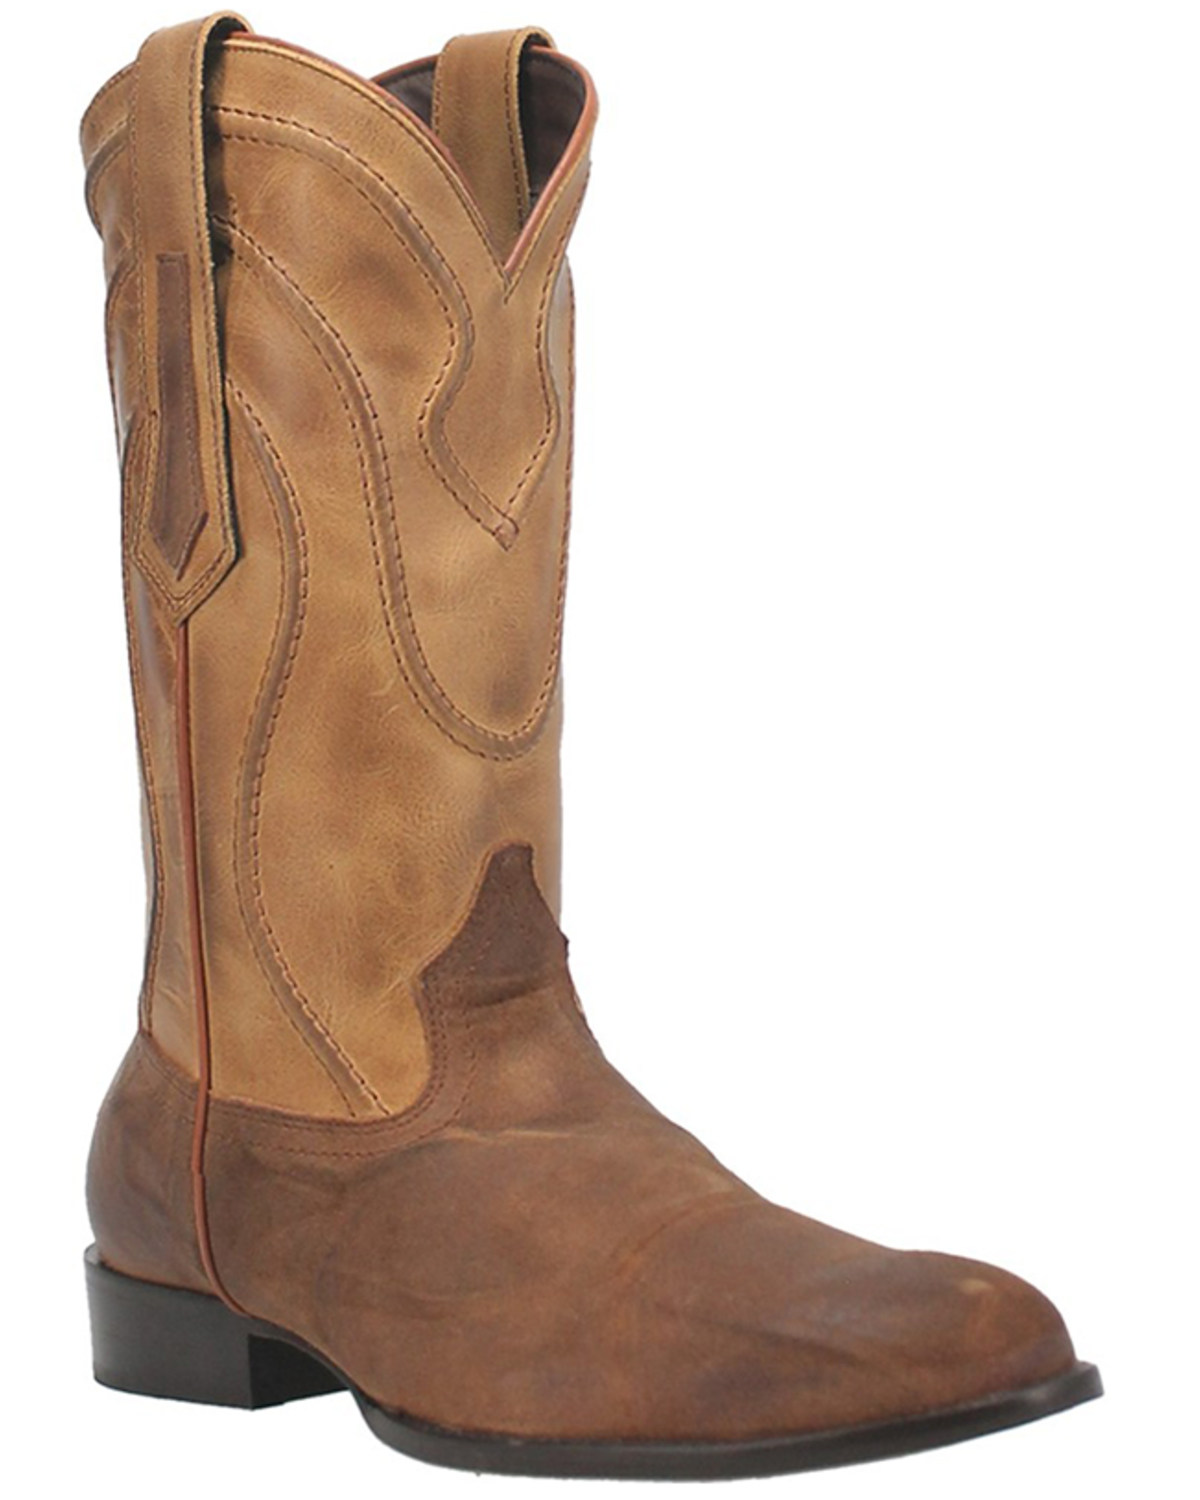 Dingo Men's Whiskey River Two Tone Western Boots - Round Toe